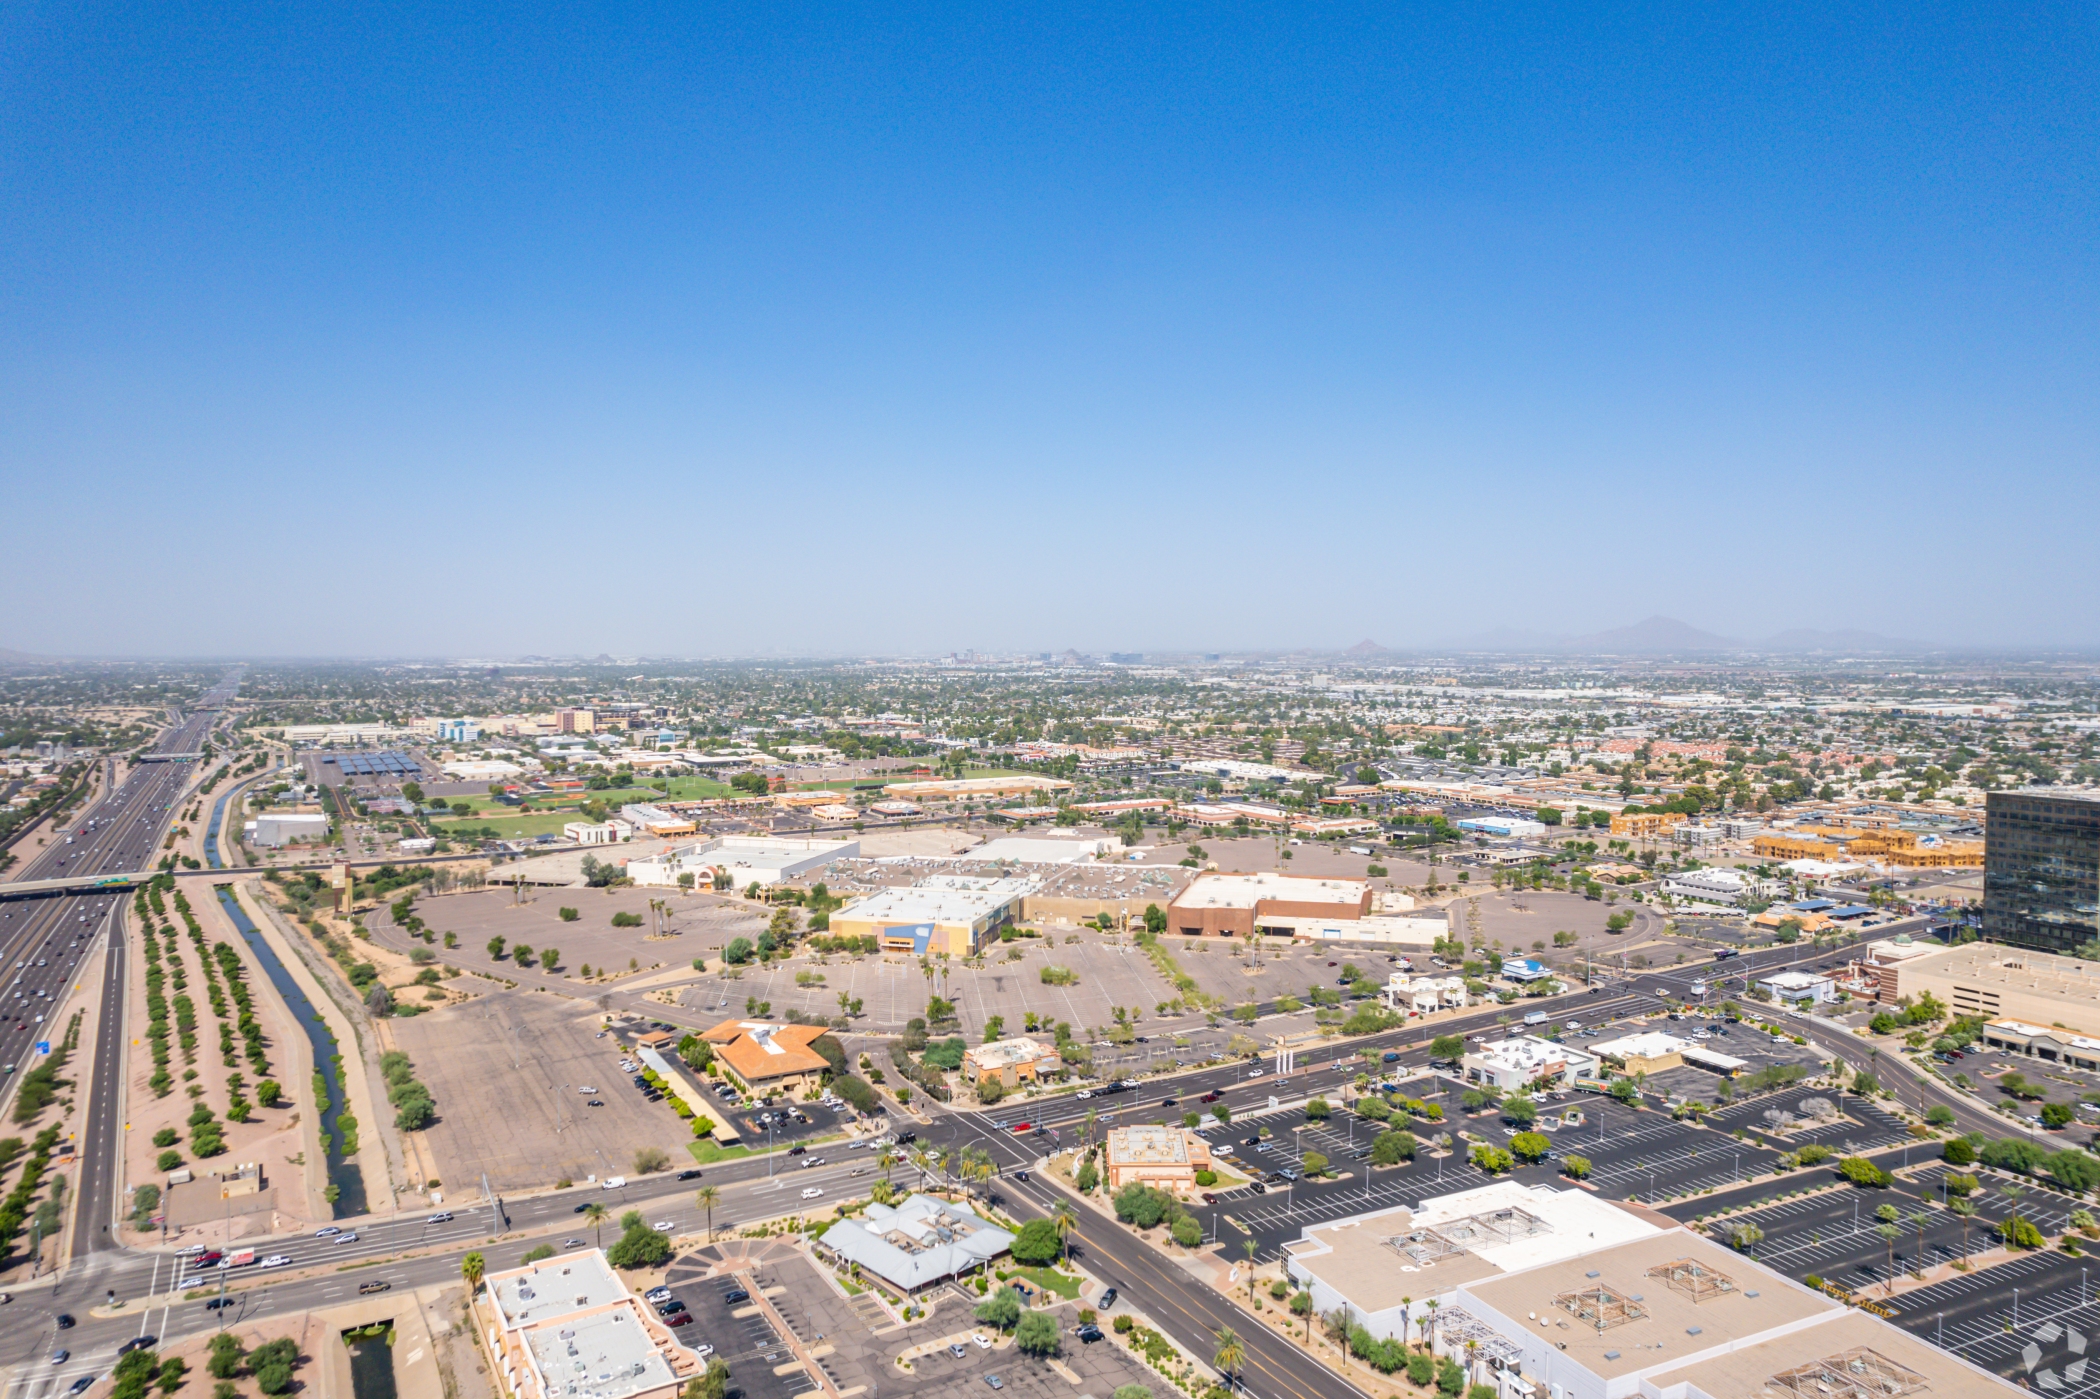 An aerial view of the former Fiesta Mall site in Mesa, Arizona, that could become the new home of the Arizona Coyotes. (CoStar)